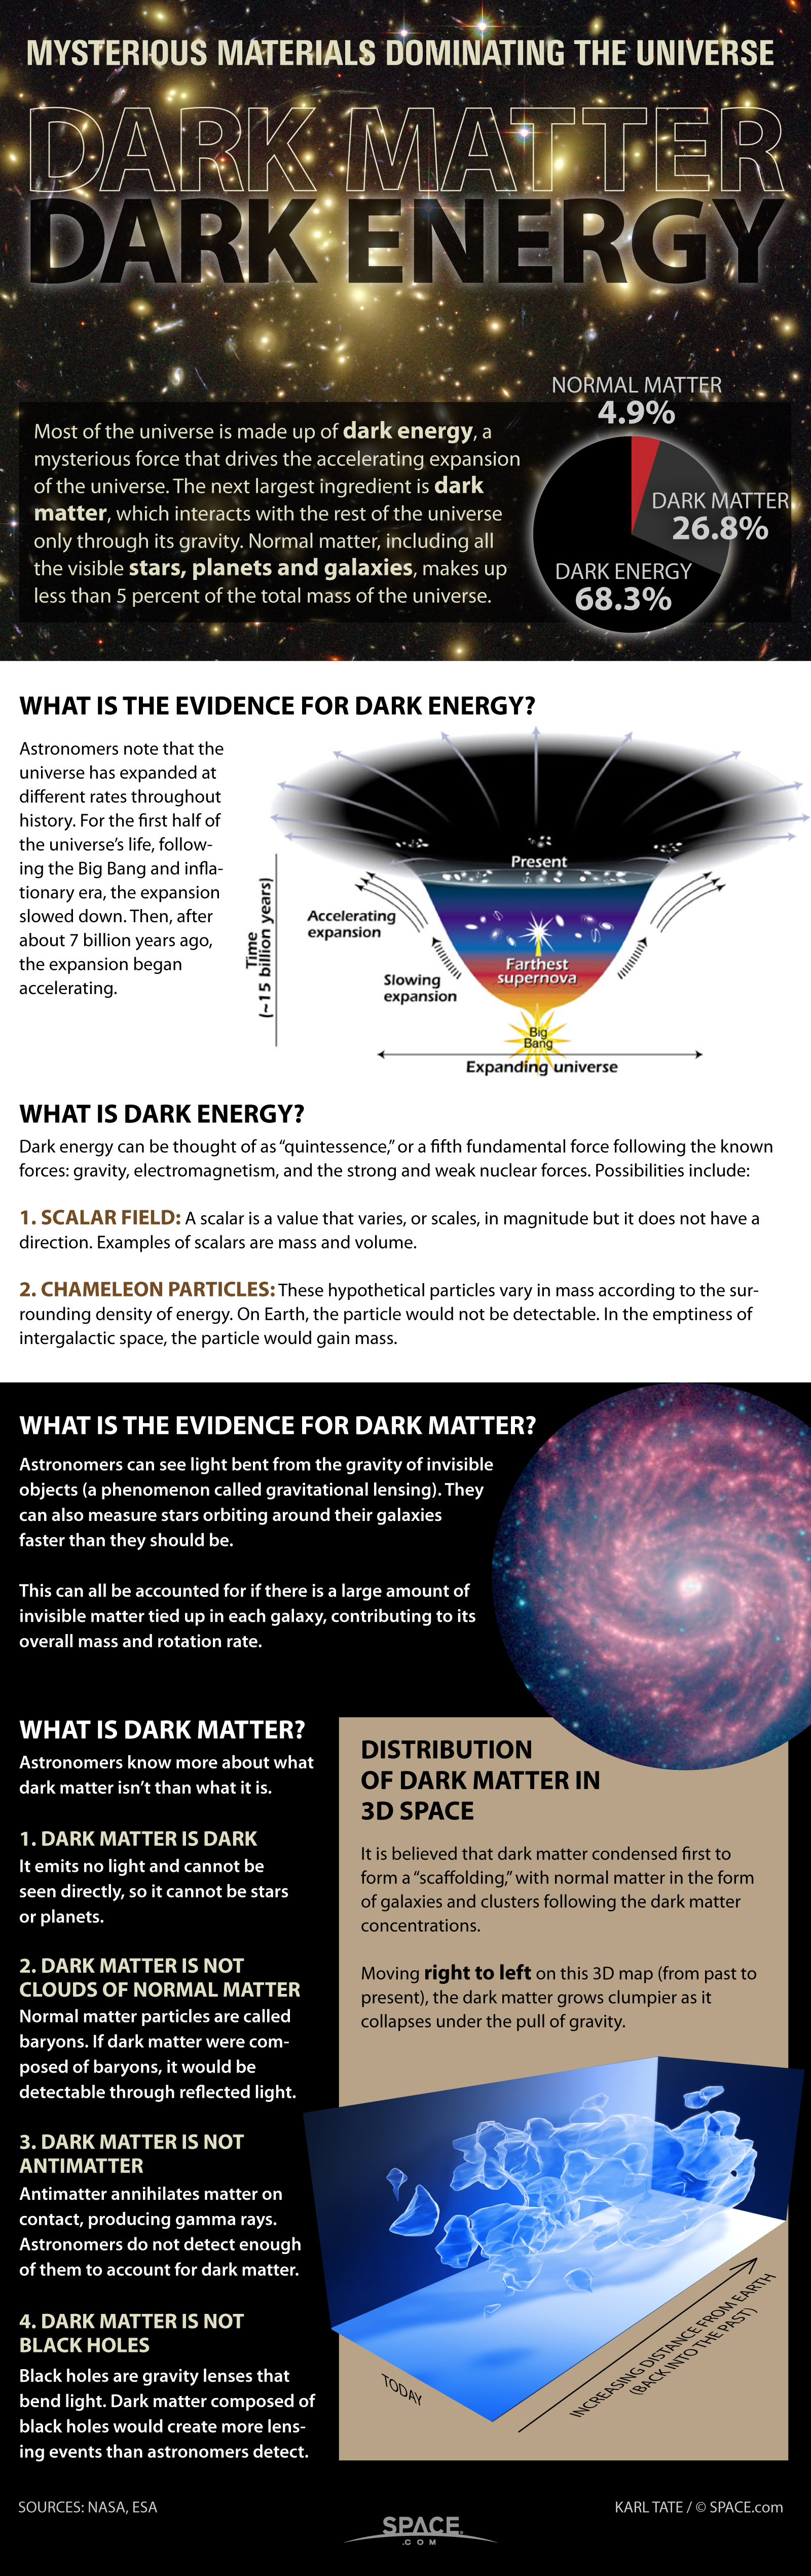 Infographic: What is known about the mysterious dark matter that fills the universe. 